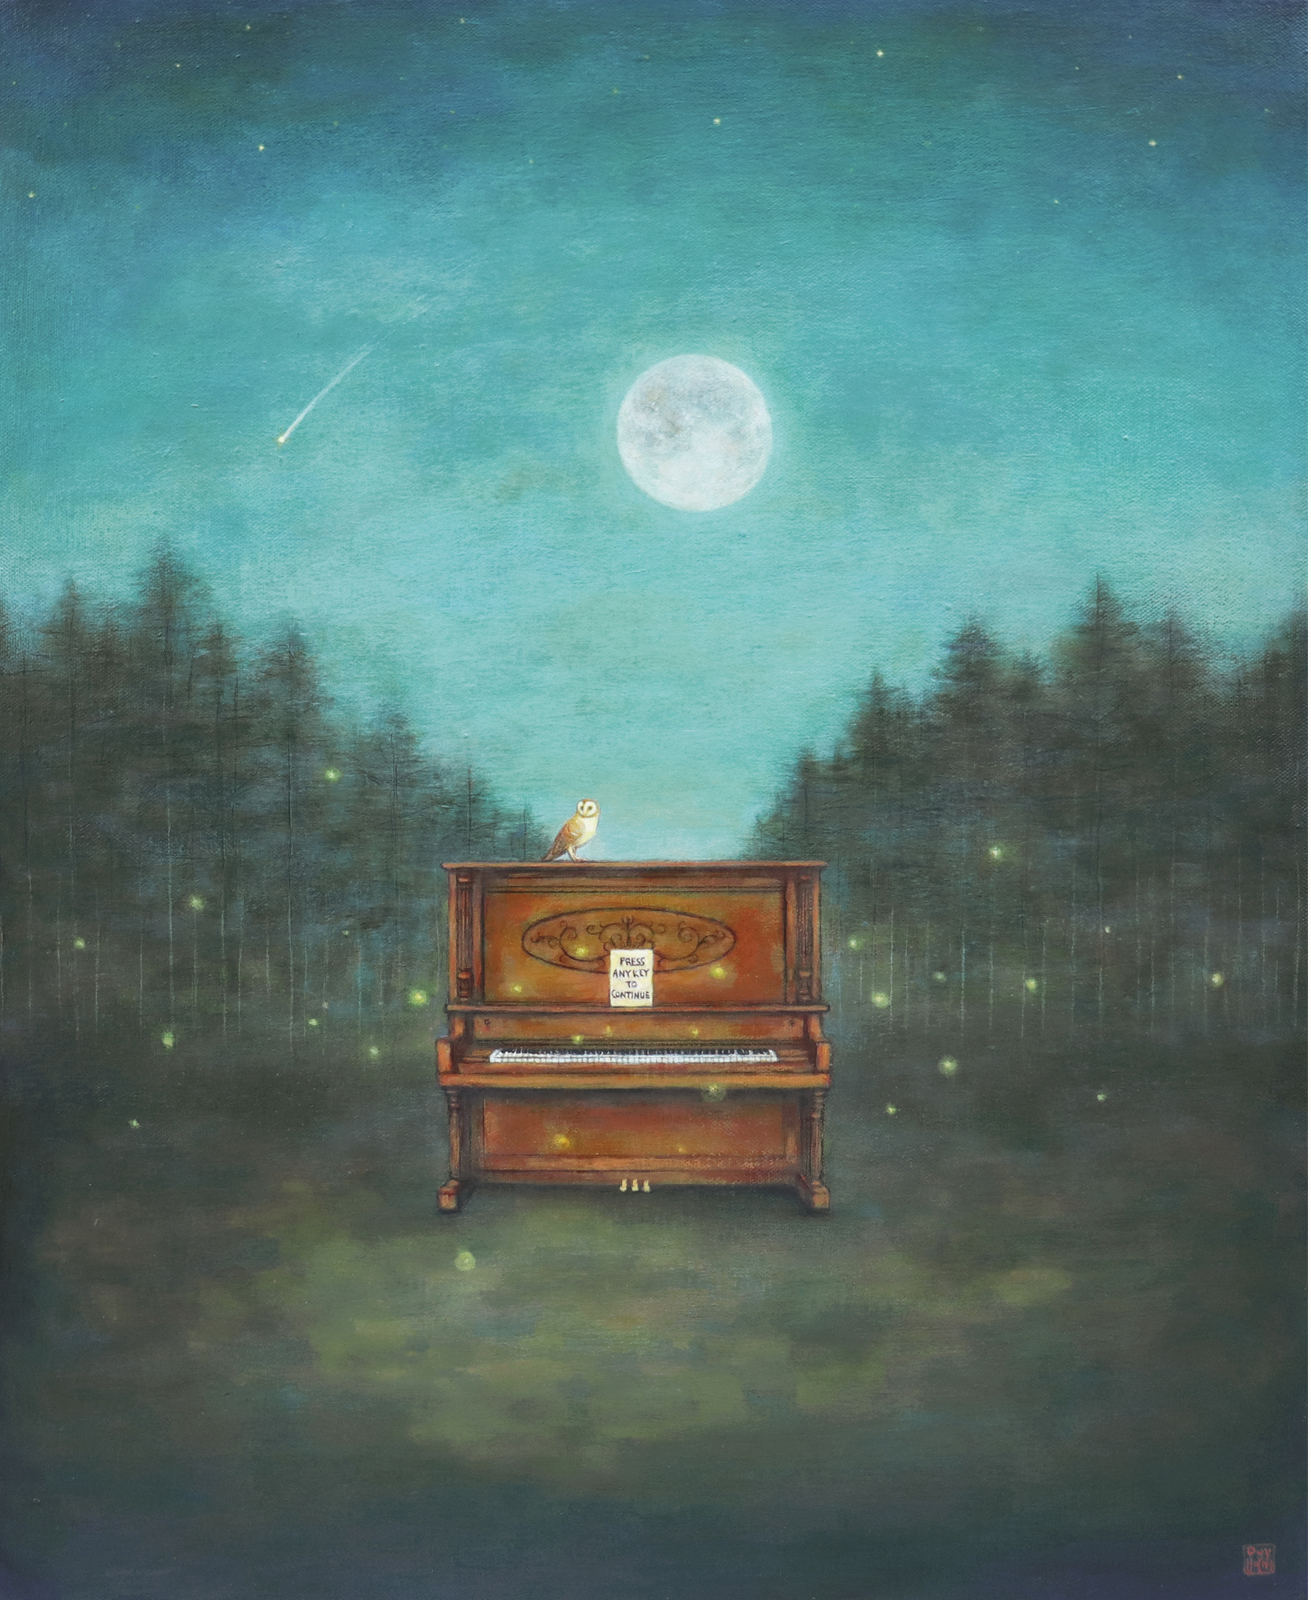 Duy Huynh painting titled "Keys to Progress", features an owl sitting on a piano surrounded by fireflies. The piano sits in the forest, under a night sky with a full moon and shooting star.